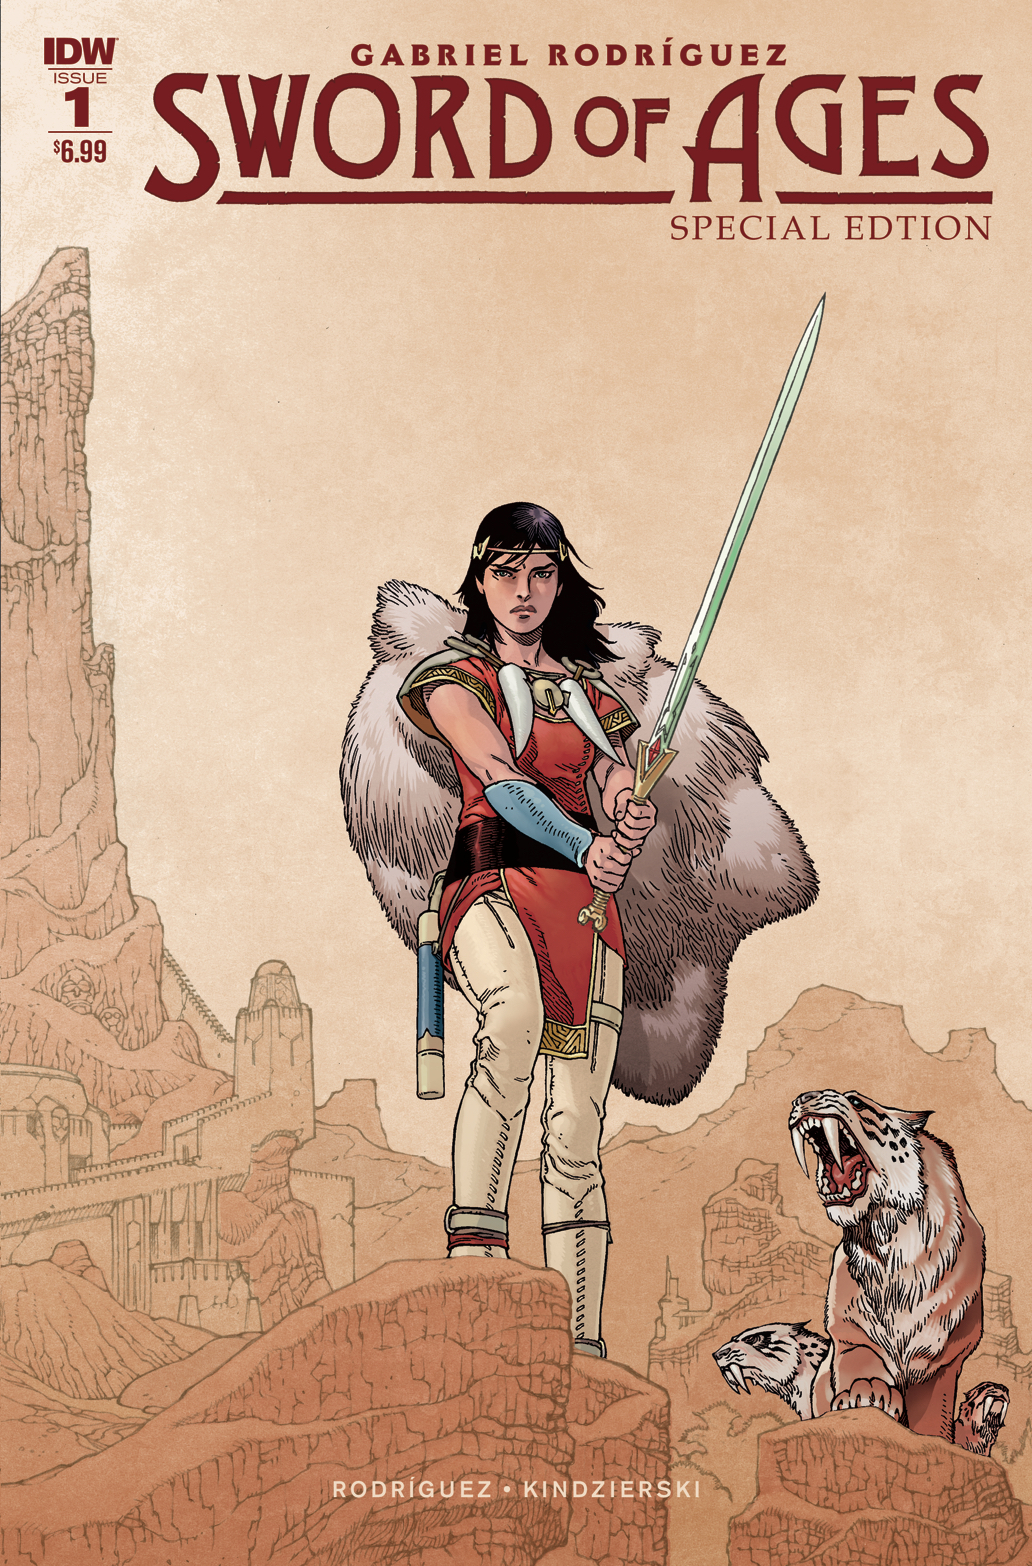 SWORD OF AGES SPECIAL EDITION #1 CVR A RODRIGUEZ